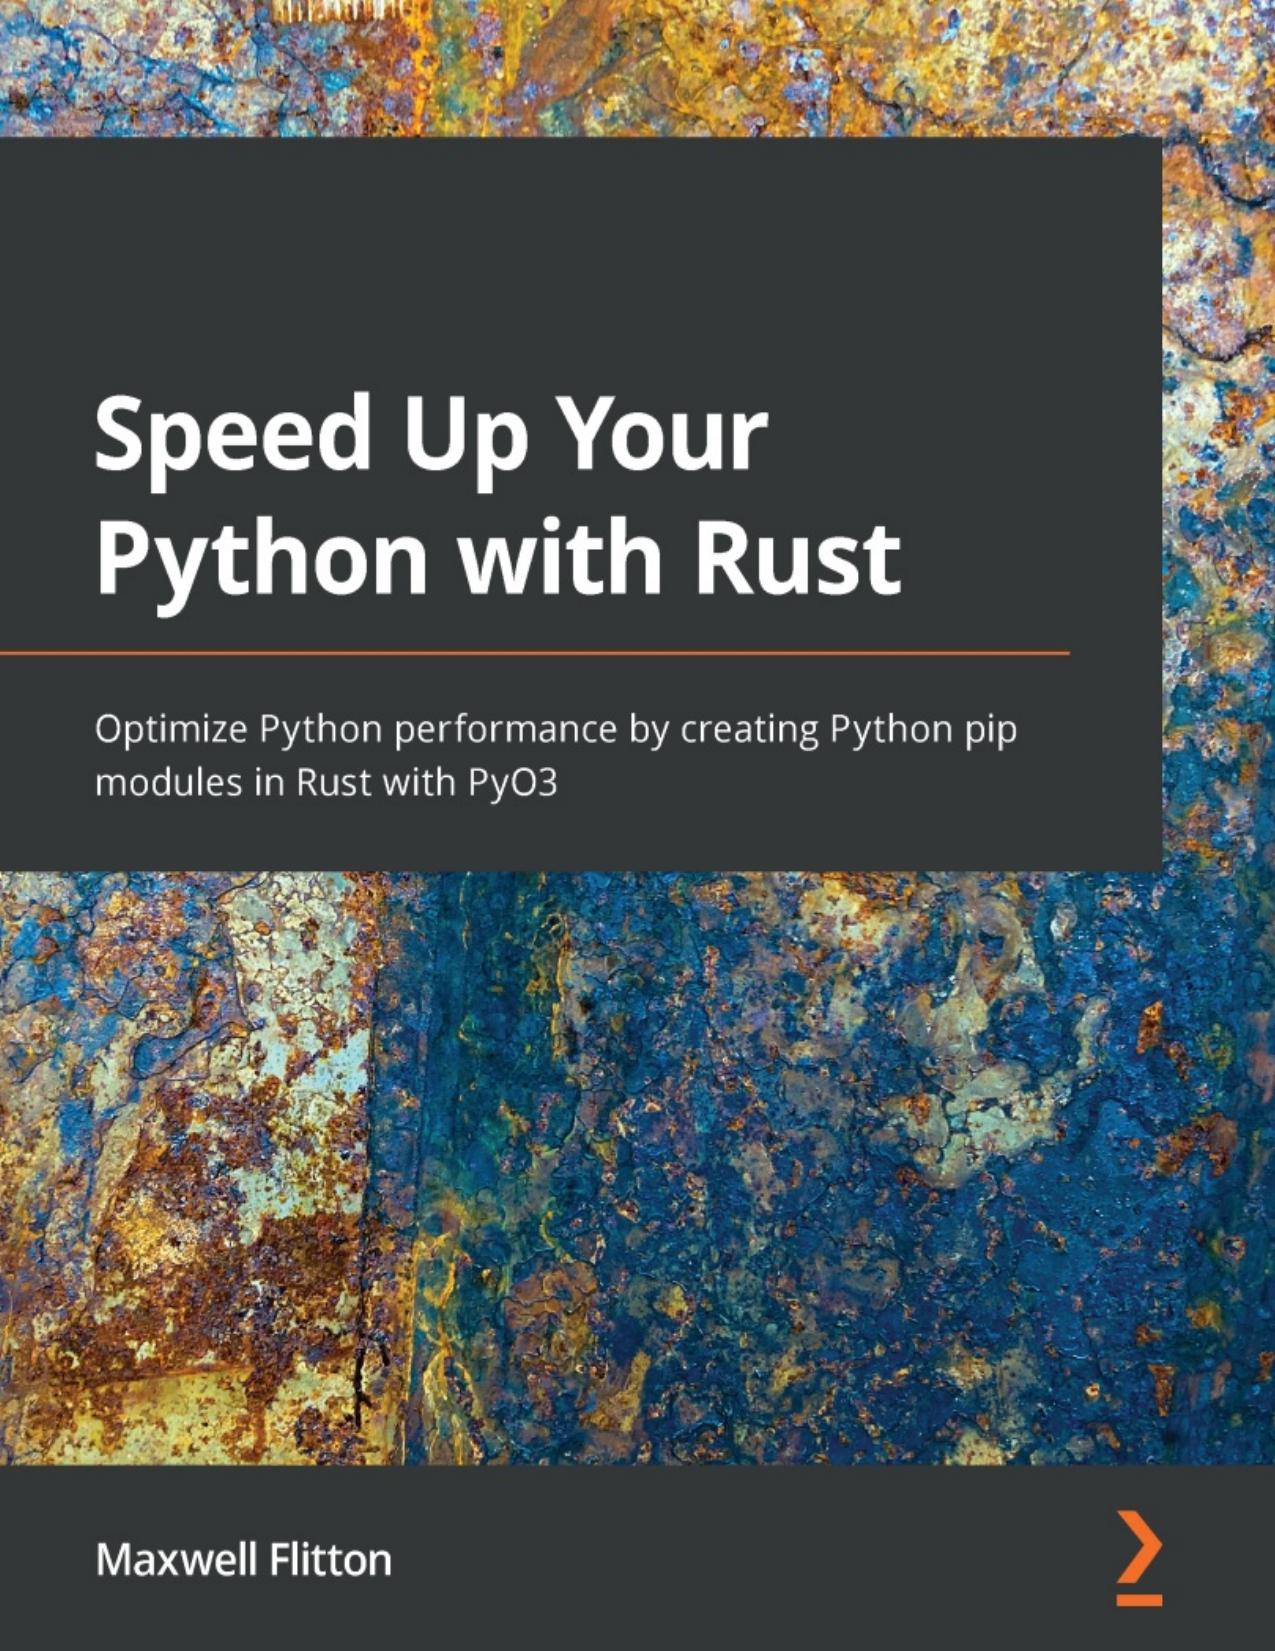 Speed Up Your Python with Rust by Maxwell Flitton